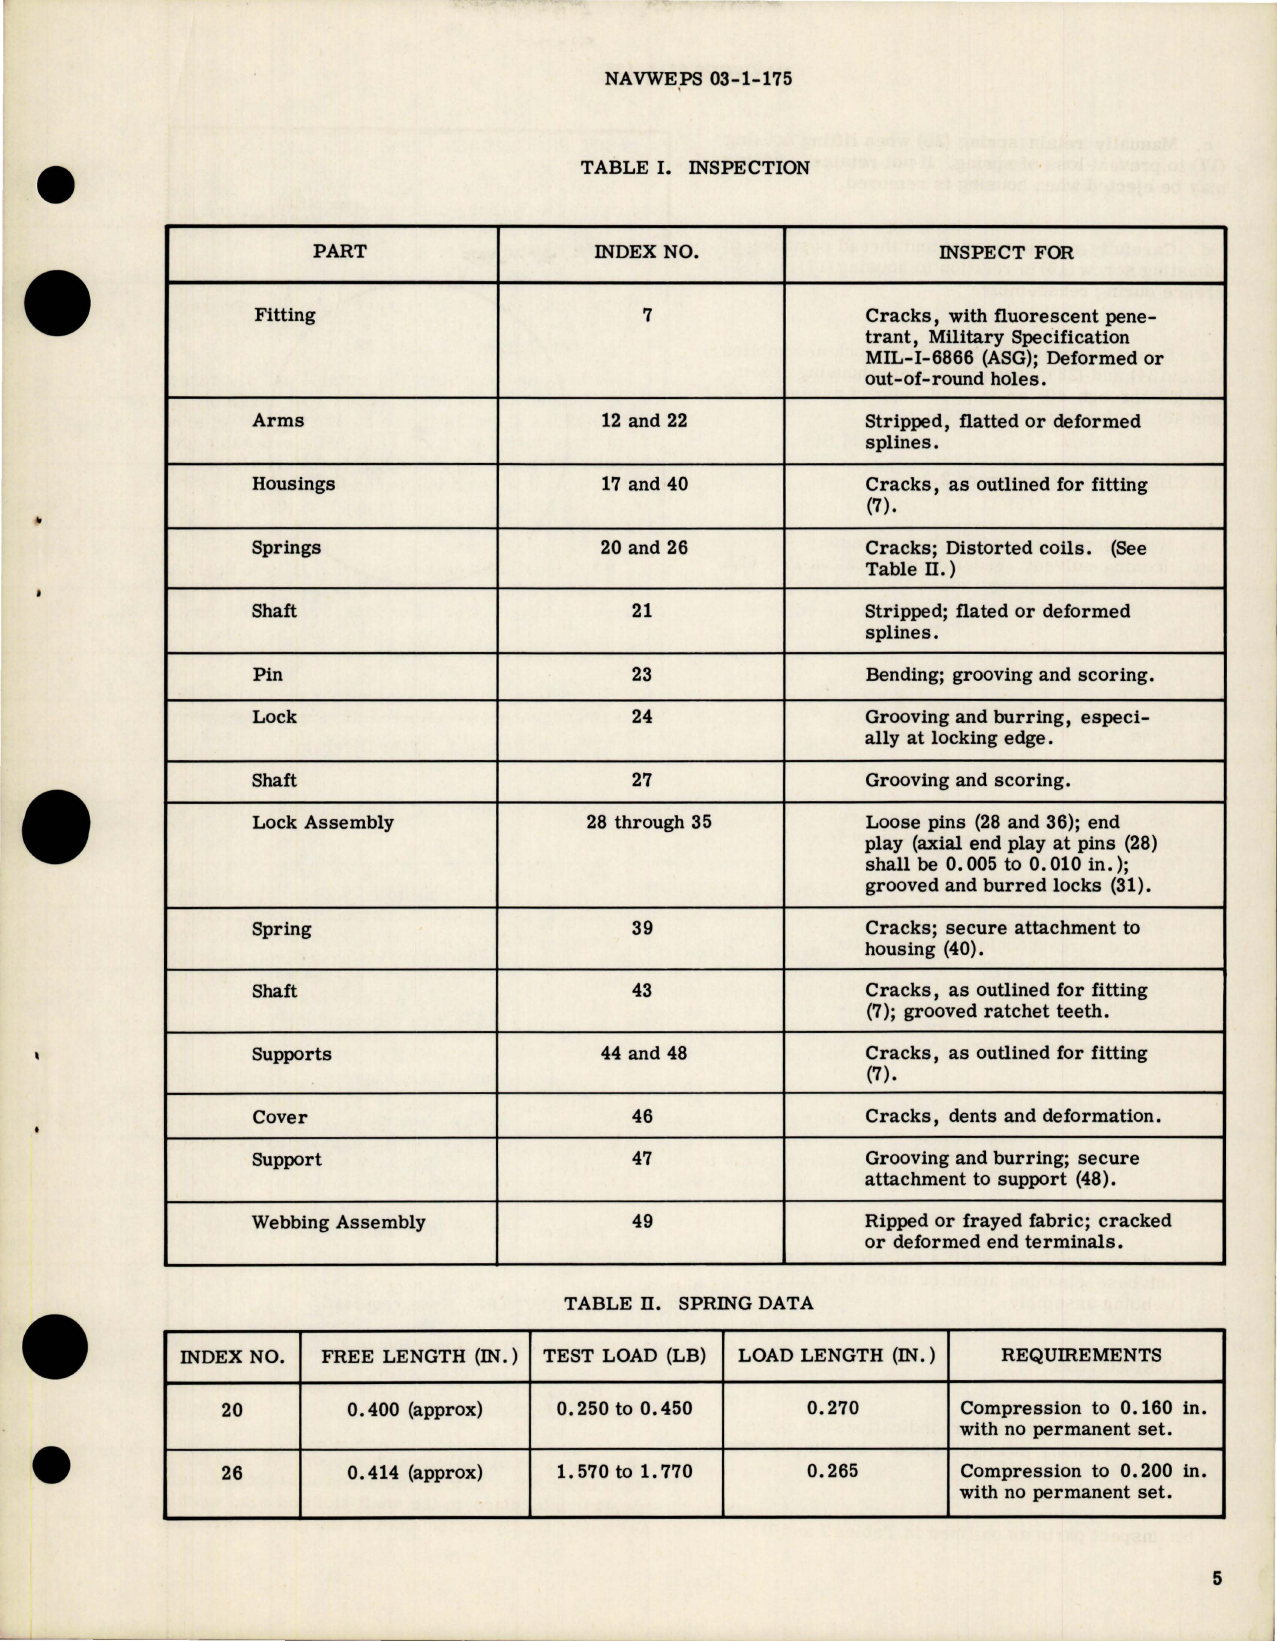 Sample page 7 from AirCorps Library document: Overhaul Instructions with Parts for Shoulder Harness Takeup Inertia Restraint Assembly - Part 7935-1